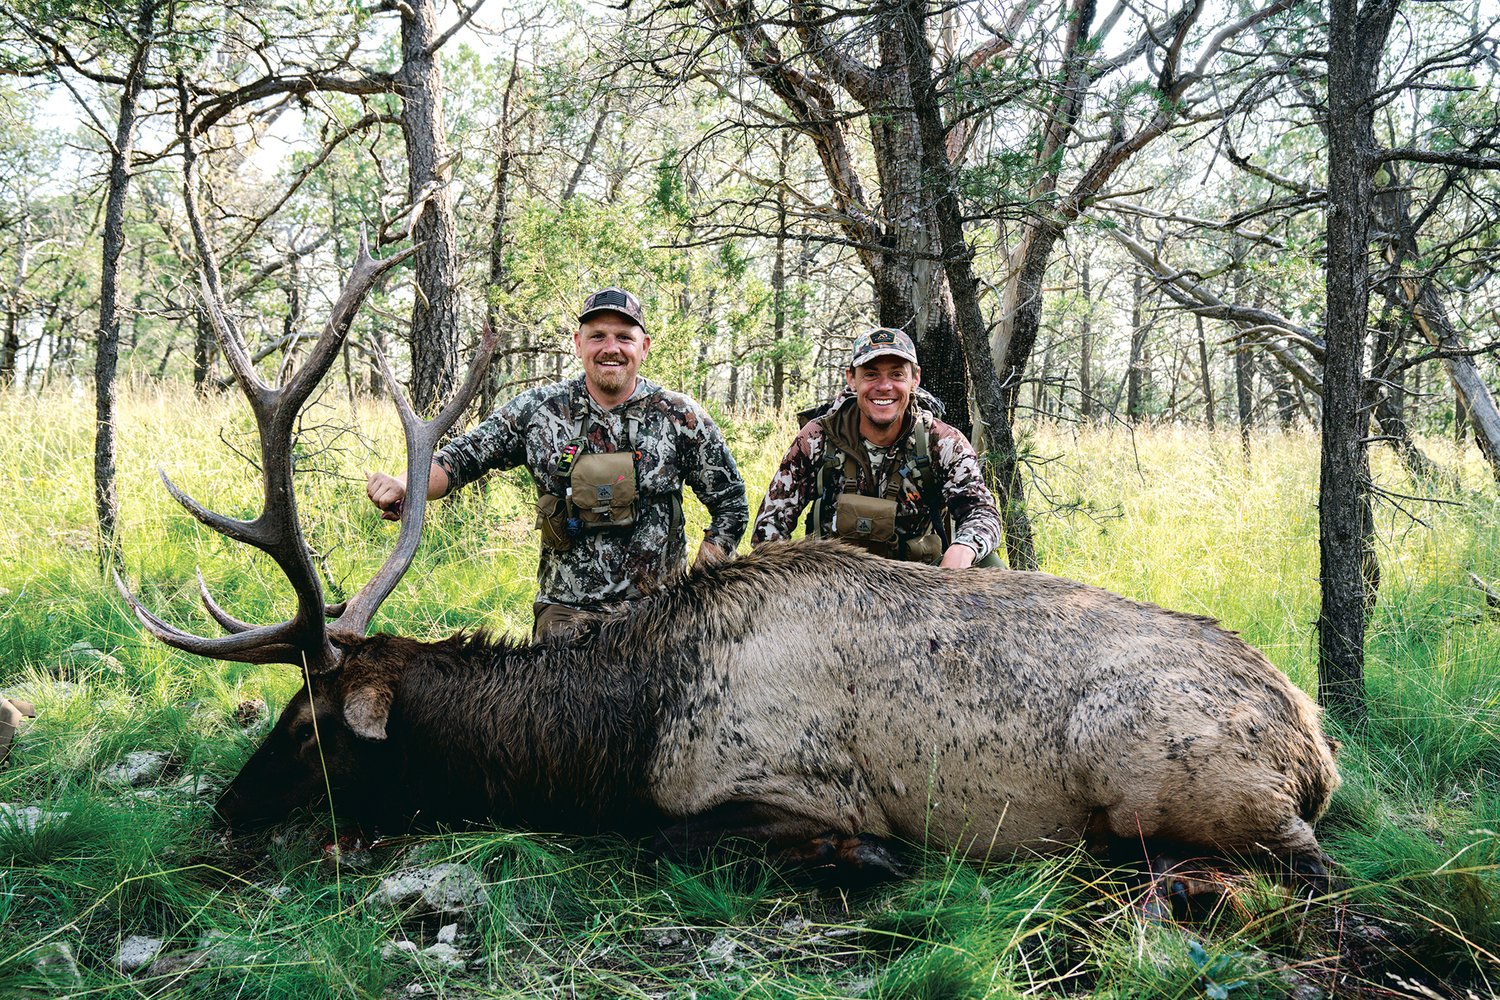 Jason Phelps  and Steven Rinella pose with an elk they hunted on a recent episode of the Netflix show “MeatEater.”